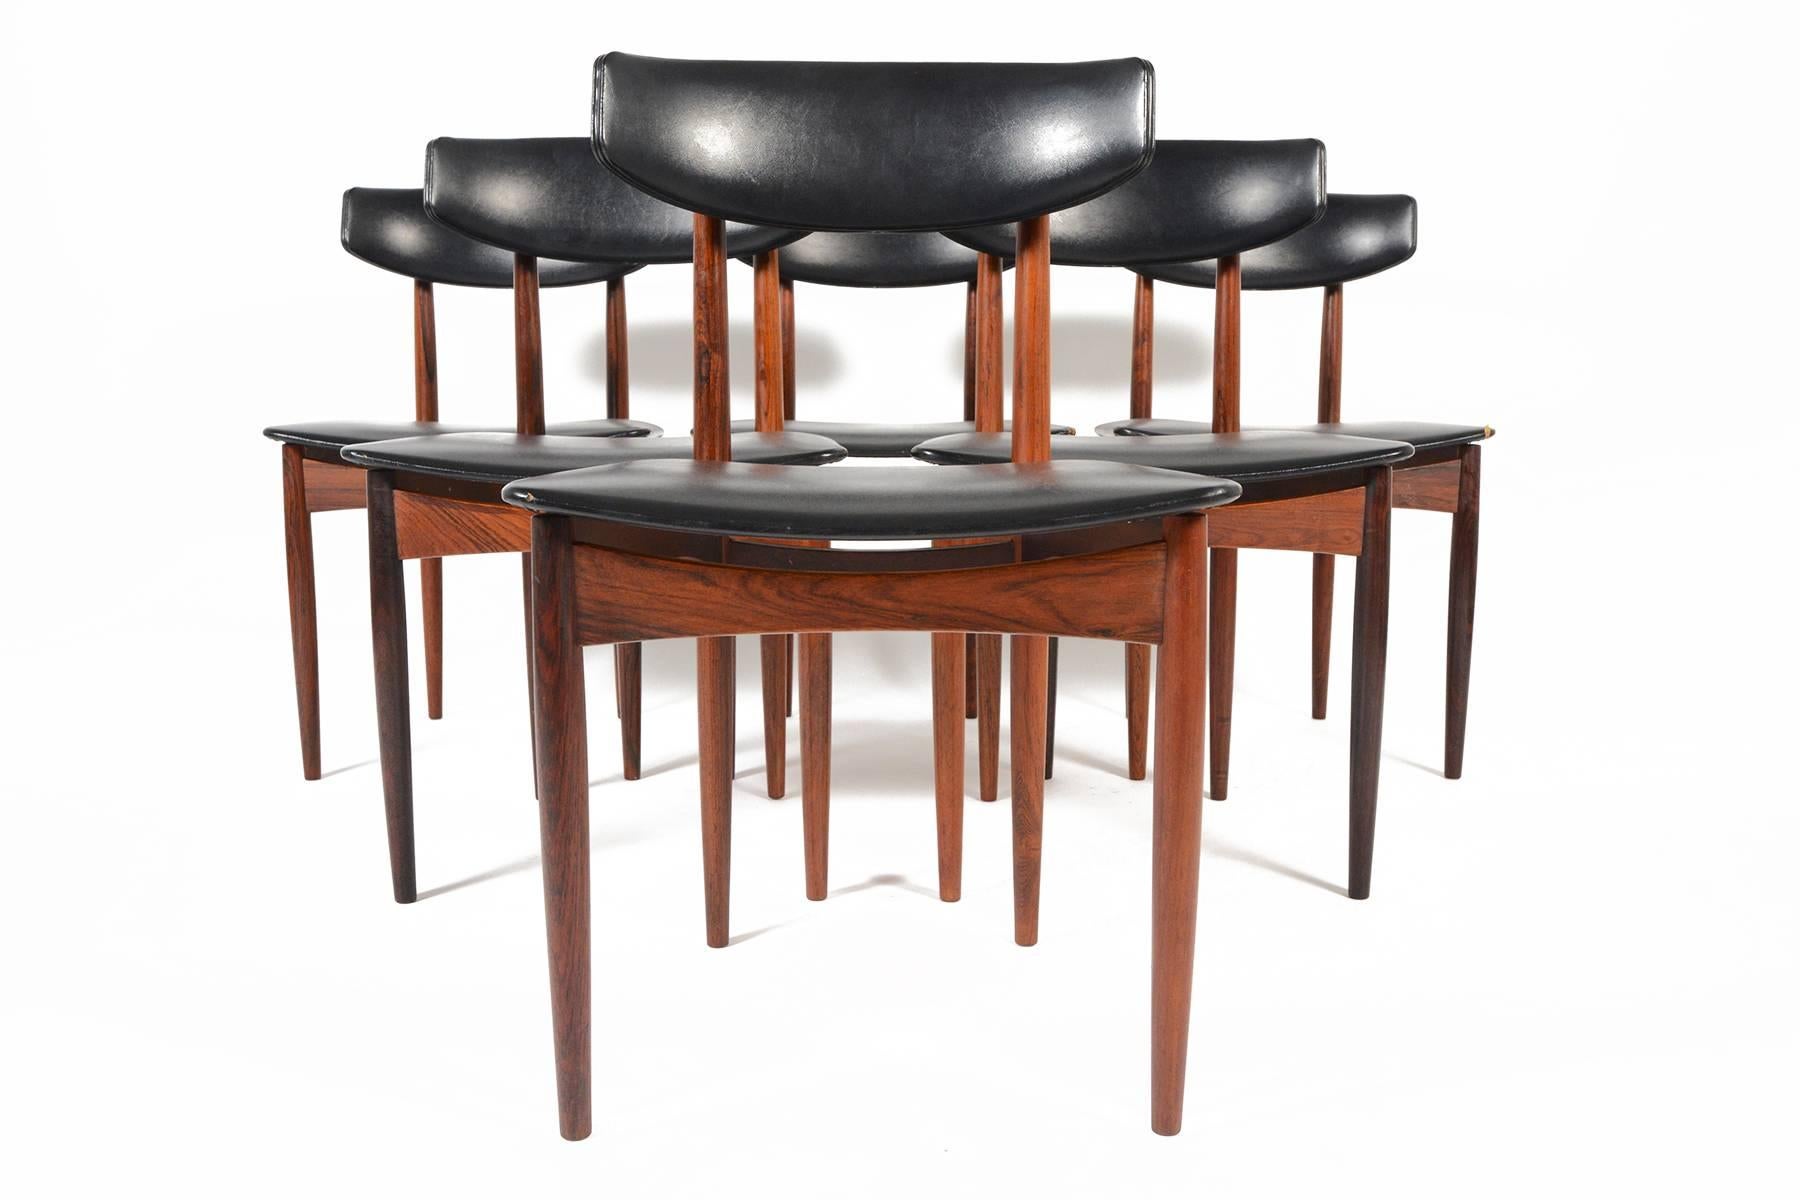 This gorgeous set of six mid century dining chairs in rosewood is in the manner of Ib Kofod-Larsen. Perfect for pairing with any vintage or modern table, generously padded backrests and seats provided hours of comfortable dinning. Turned rosewood